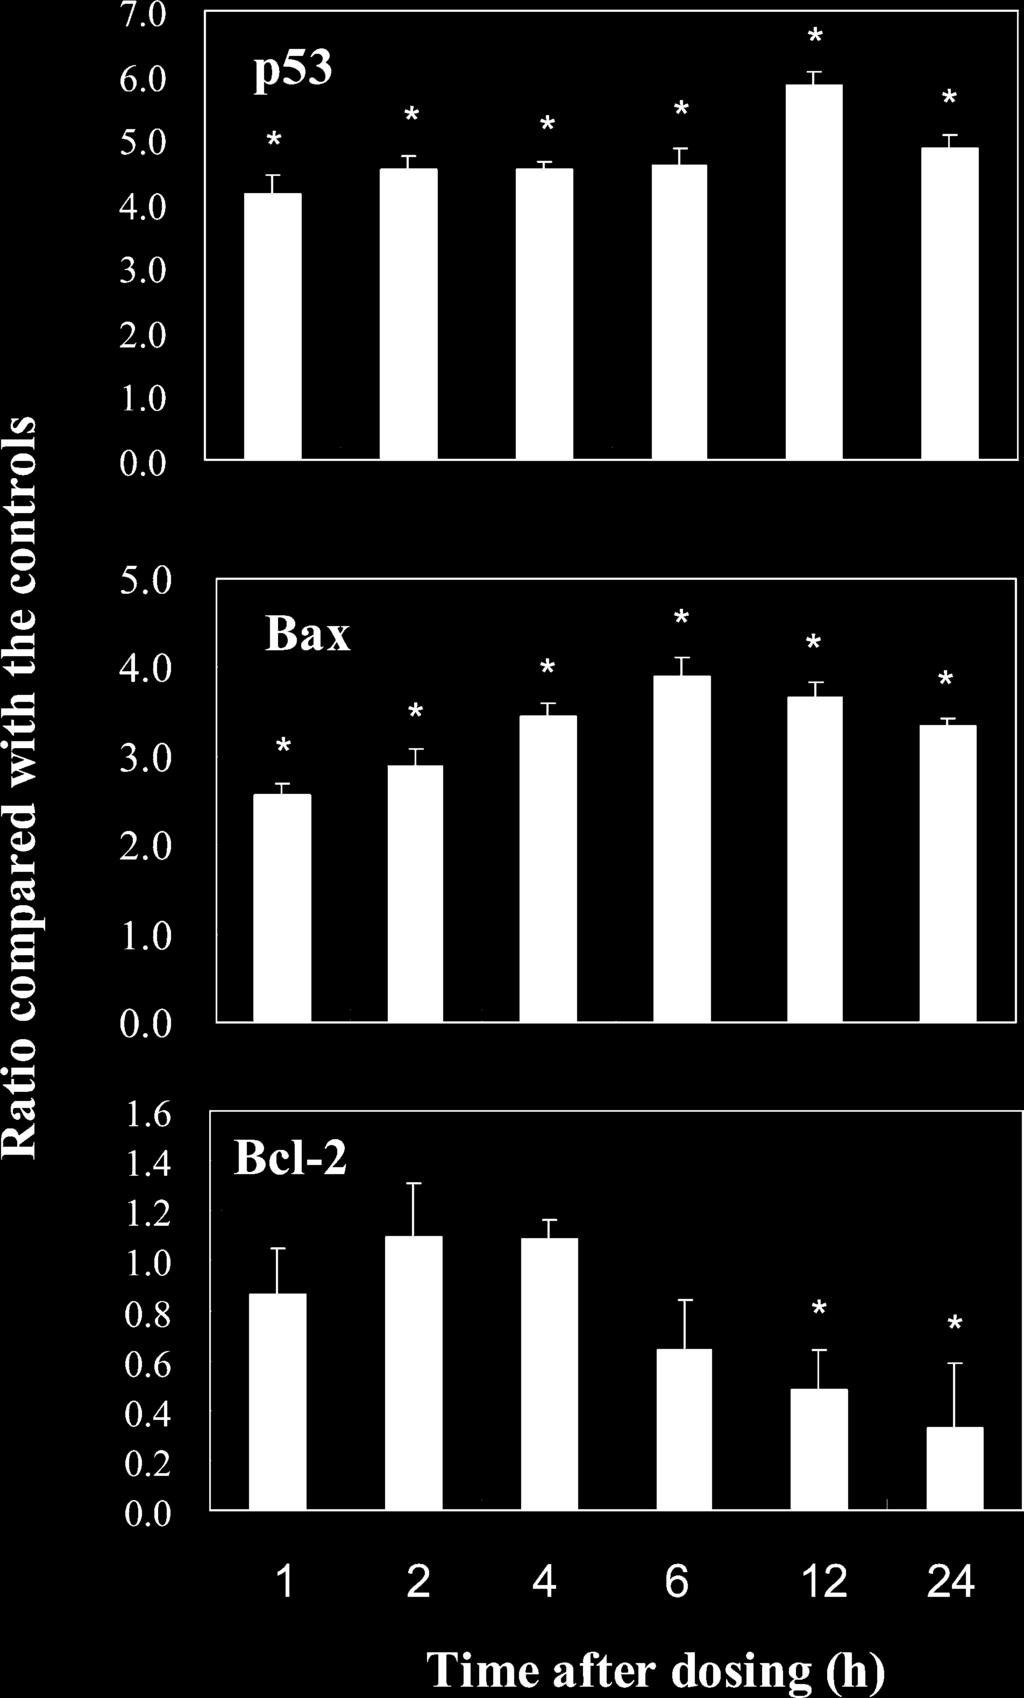 114 LI ET AL. Fig. 1. Time course of p53, Bax, and Bcl-2 mrna expression by Q-PCR analysis in rat testis after treatment with 87 lg MC-LRequivalent/kg body weight.